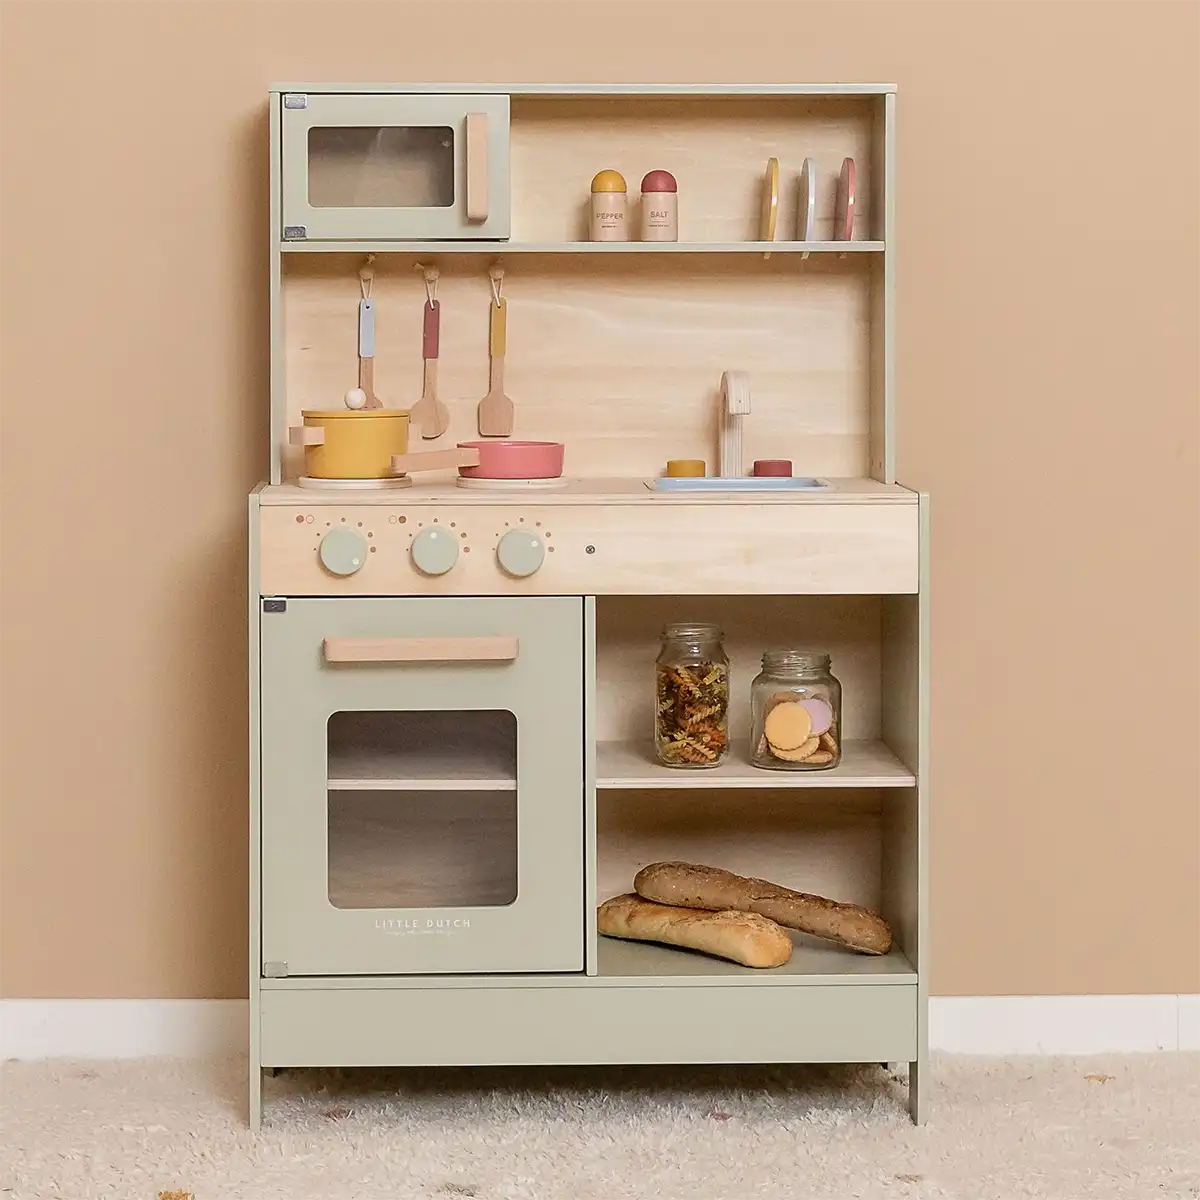 Wooden Play Kitchen in Mint